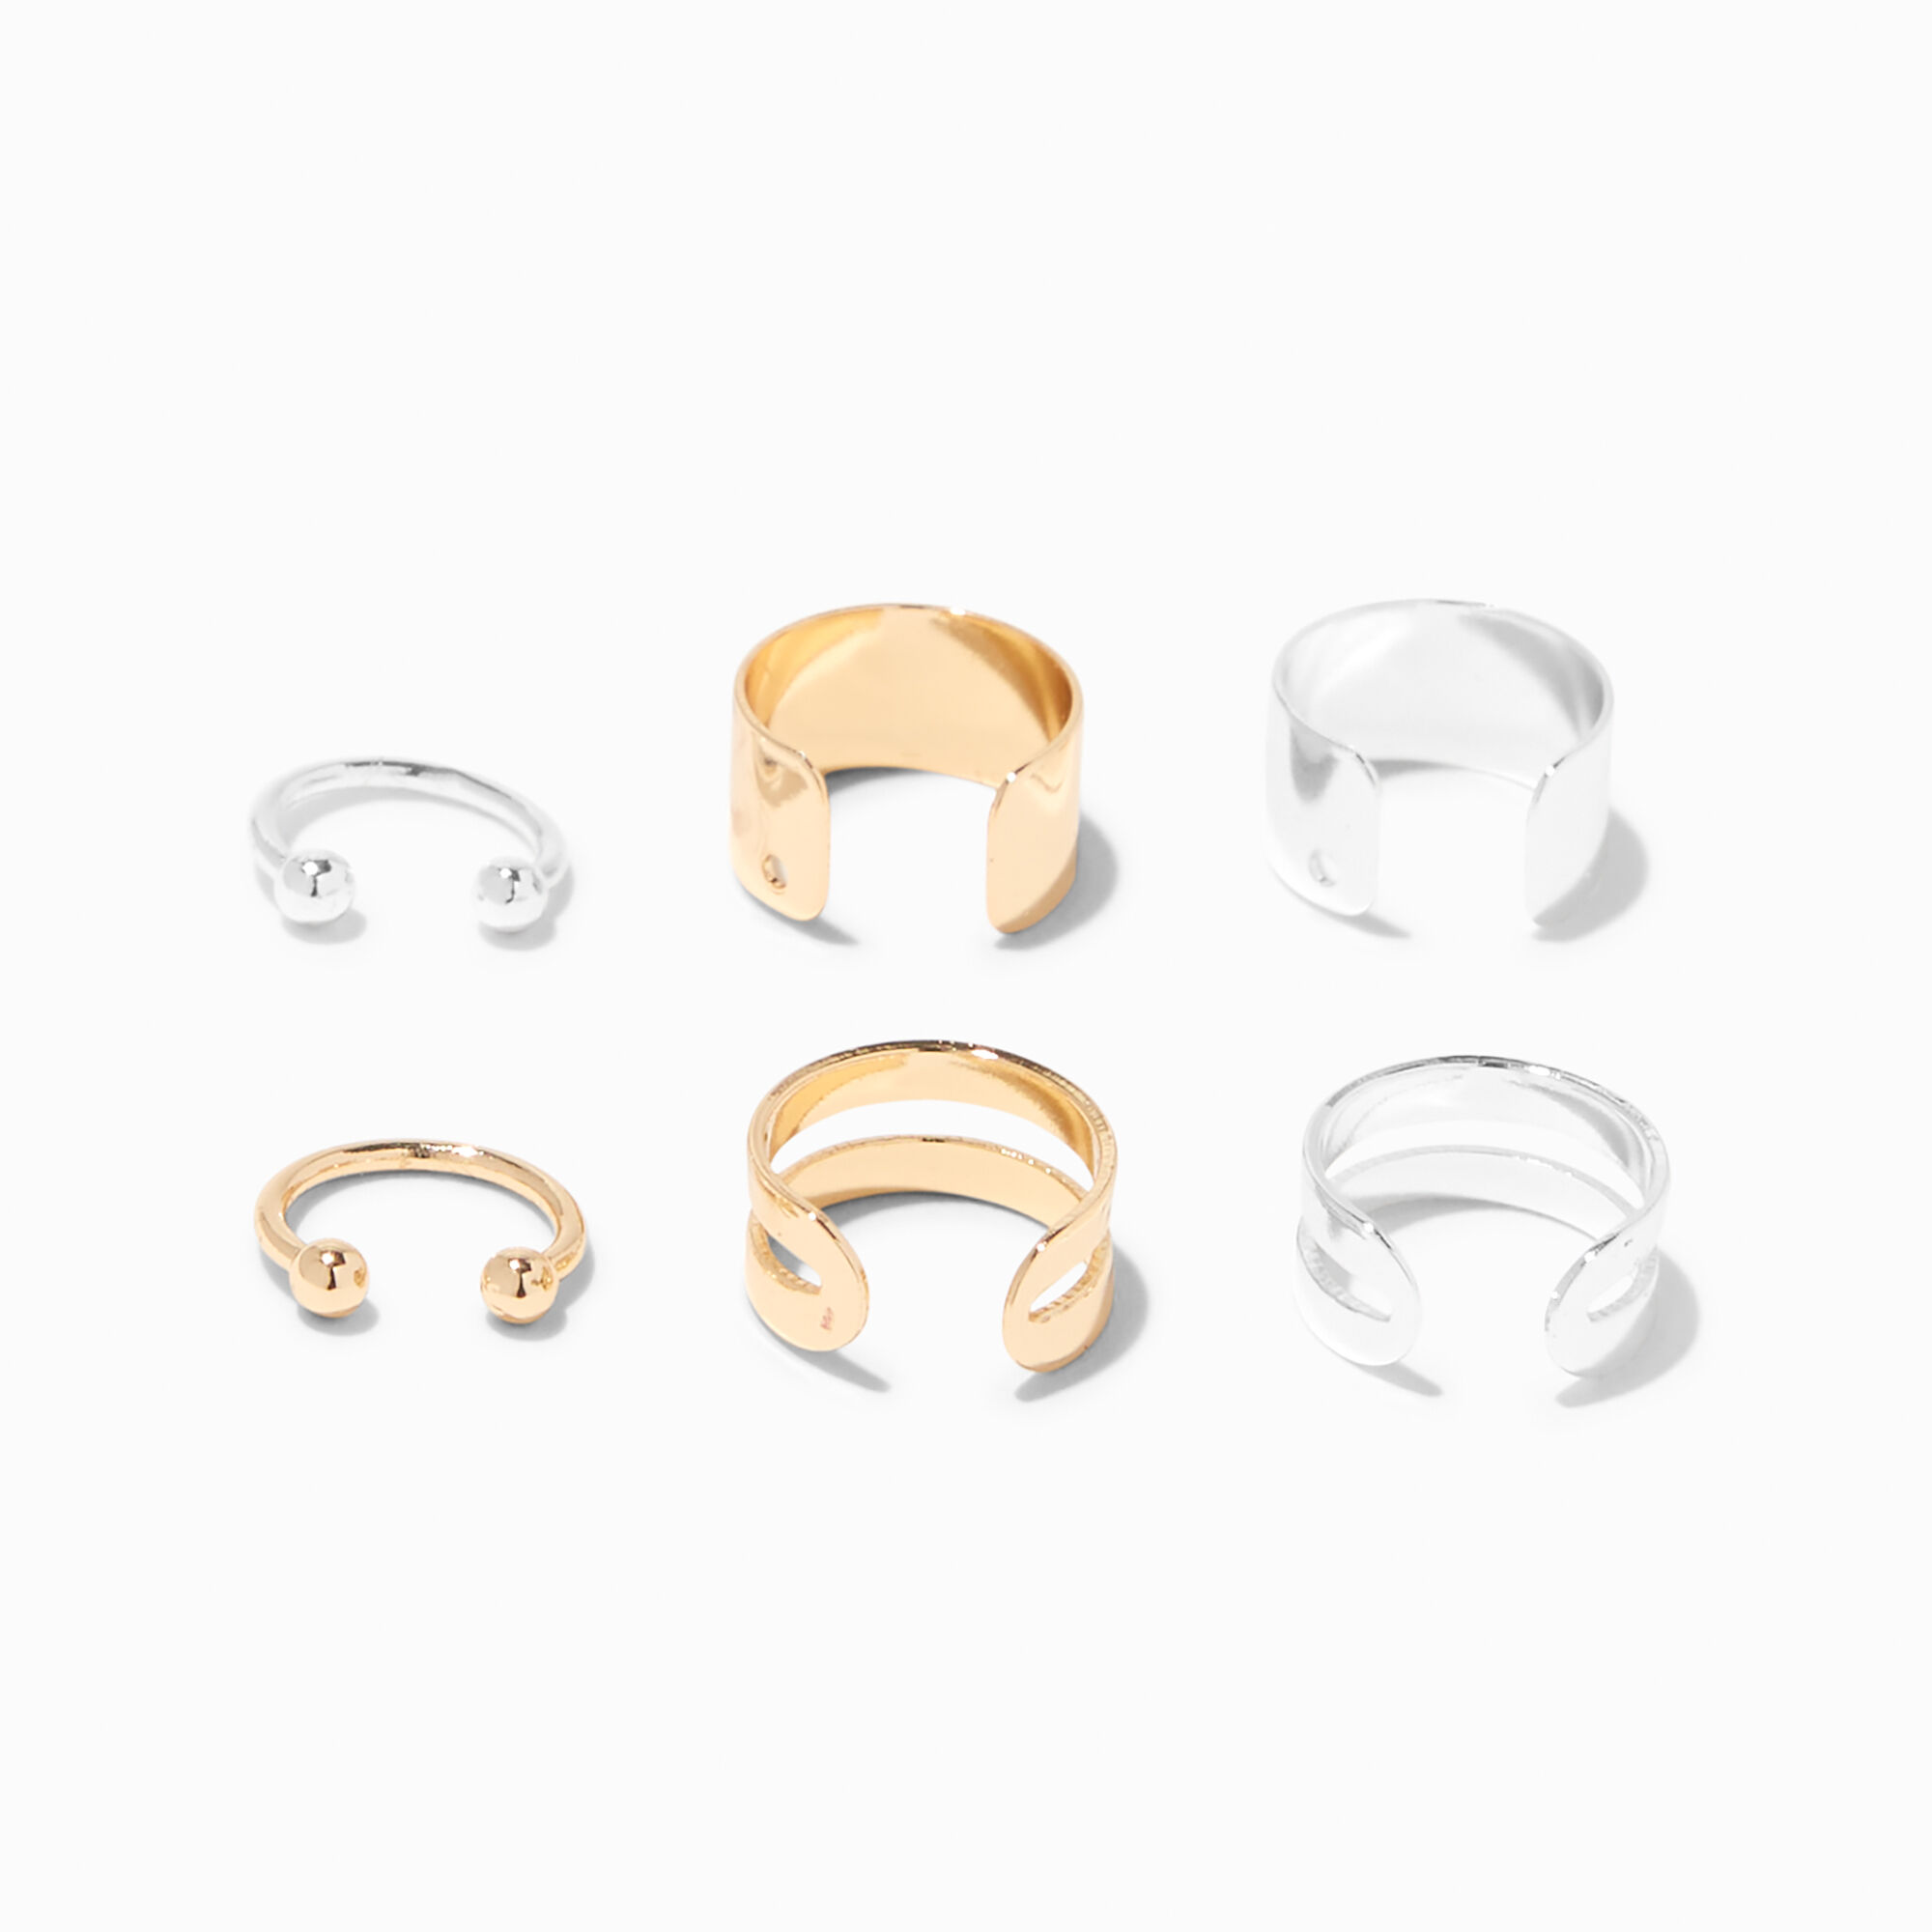 View Claires Mixed Metal Basic Ear Cuffs 6 Pack Gold information